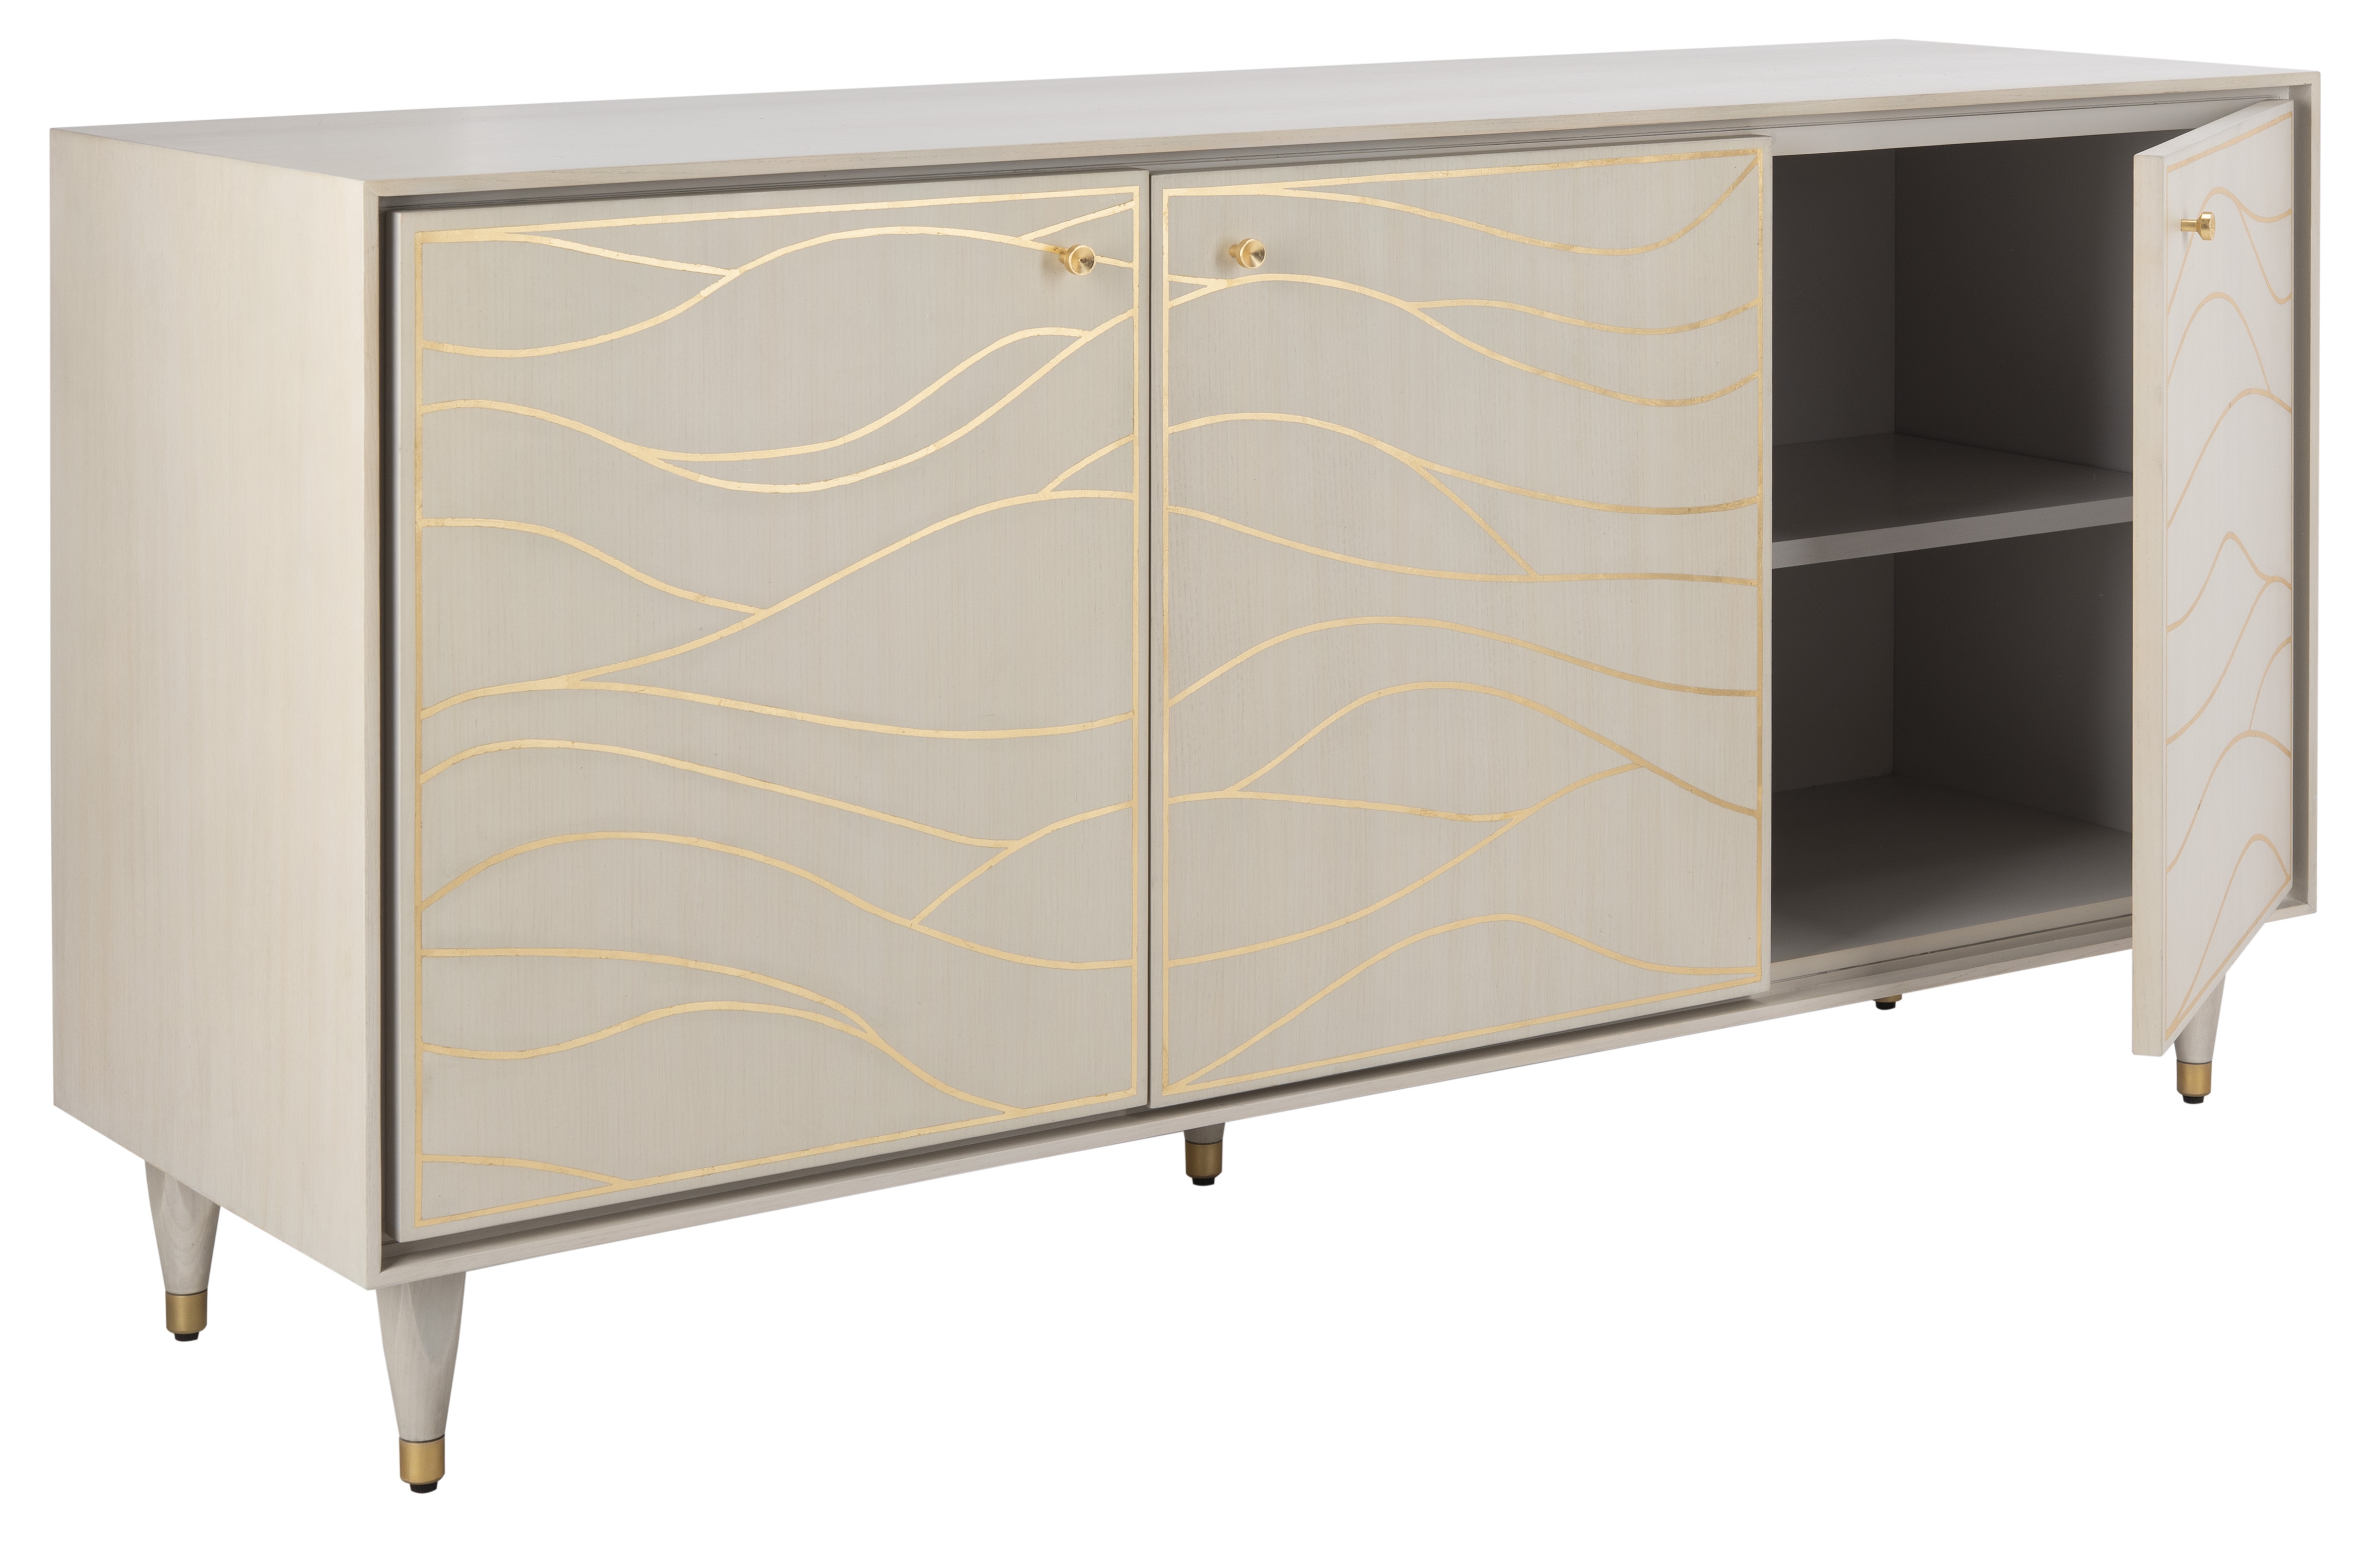 Broderick Antique Gold Wave Sideboard - White - Arlo Home - Image 1